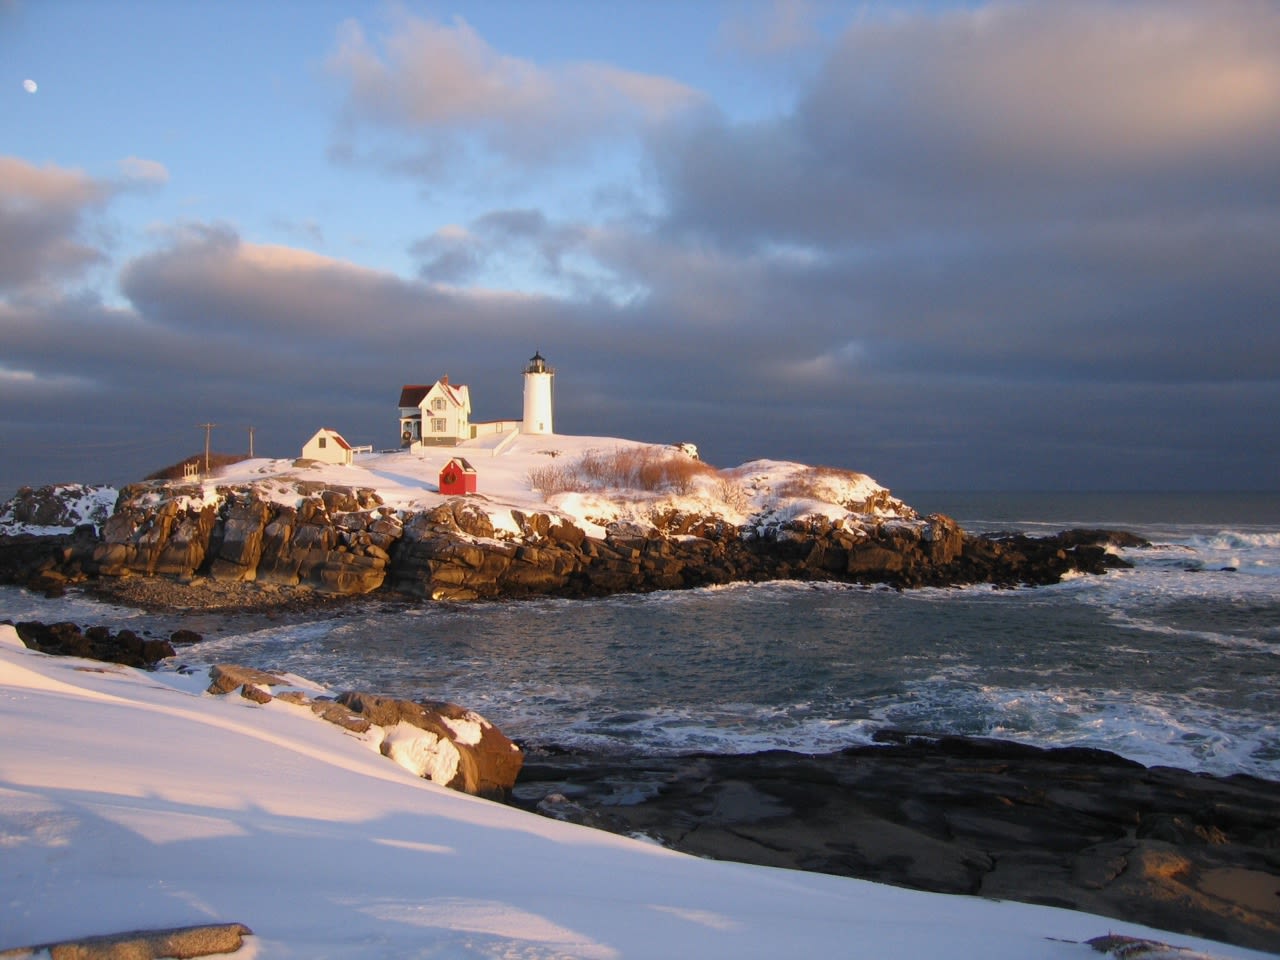 Nubble Light in York, Maine, is a central part of the community, as <a href="http://ireport.cnn.com/docs/DOC-1157810">Chris Schramm</a> describes it: "I've been all over the island and through the house and light. I've flown over it. I've been around it in an aluminum boat."